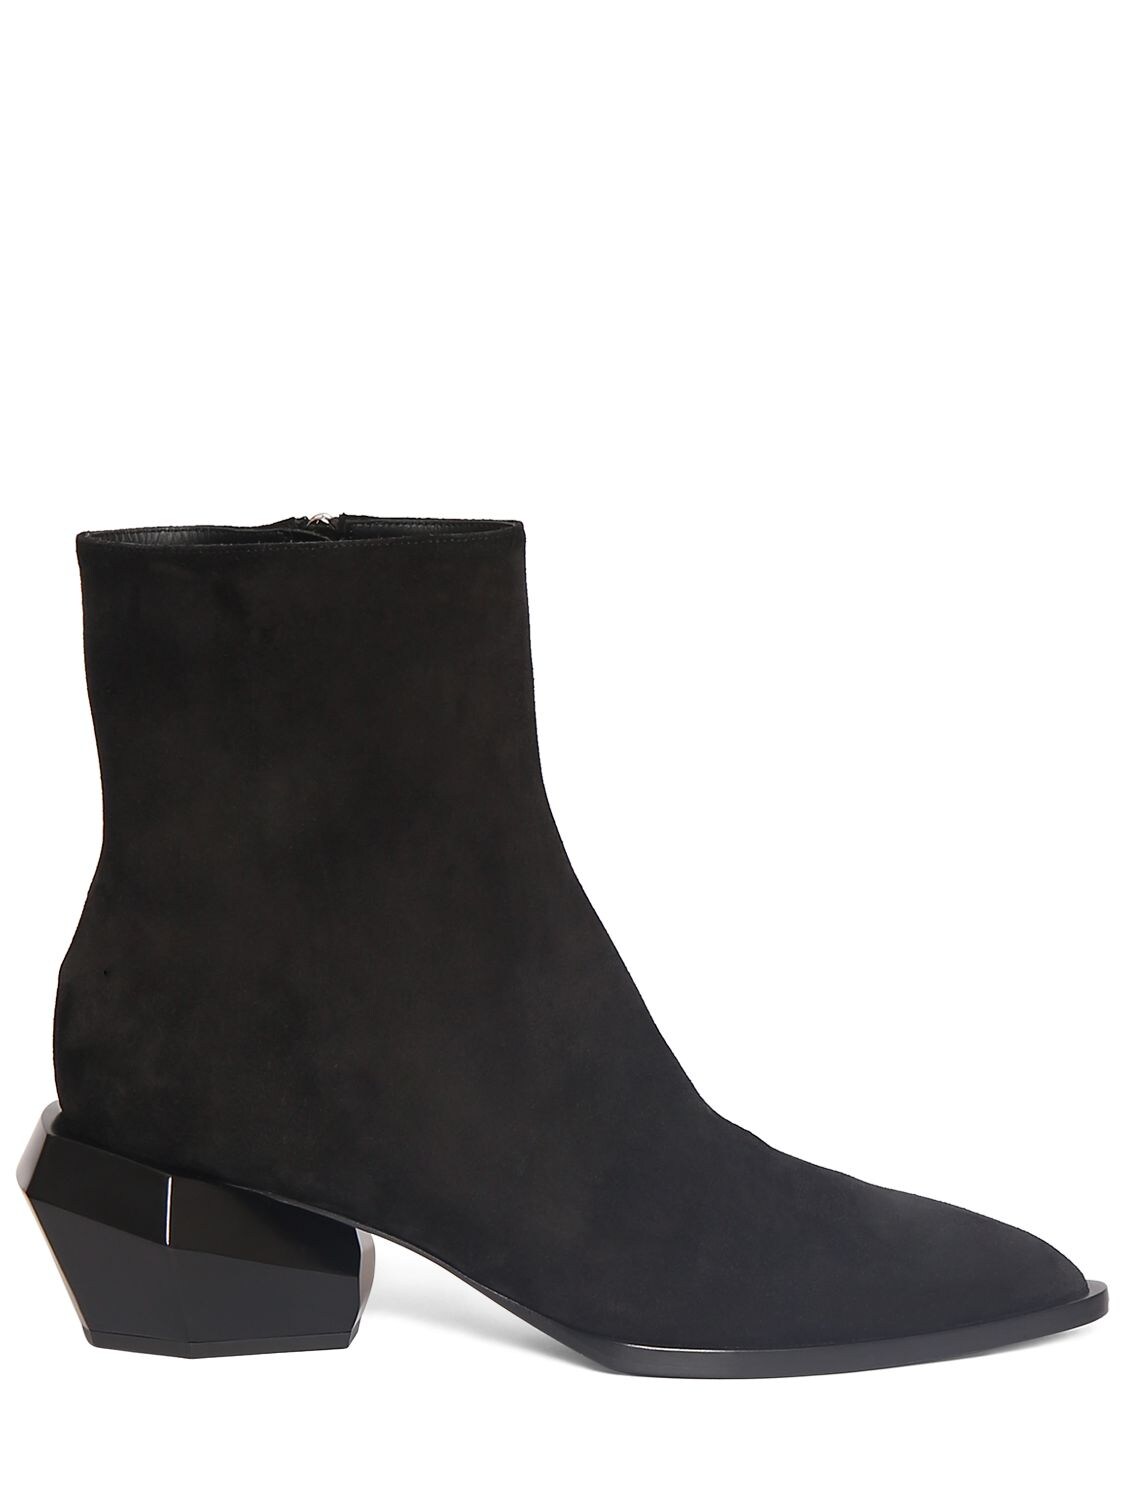 Billy Suede Ankle Boots | The Hoxton Trend